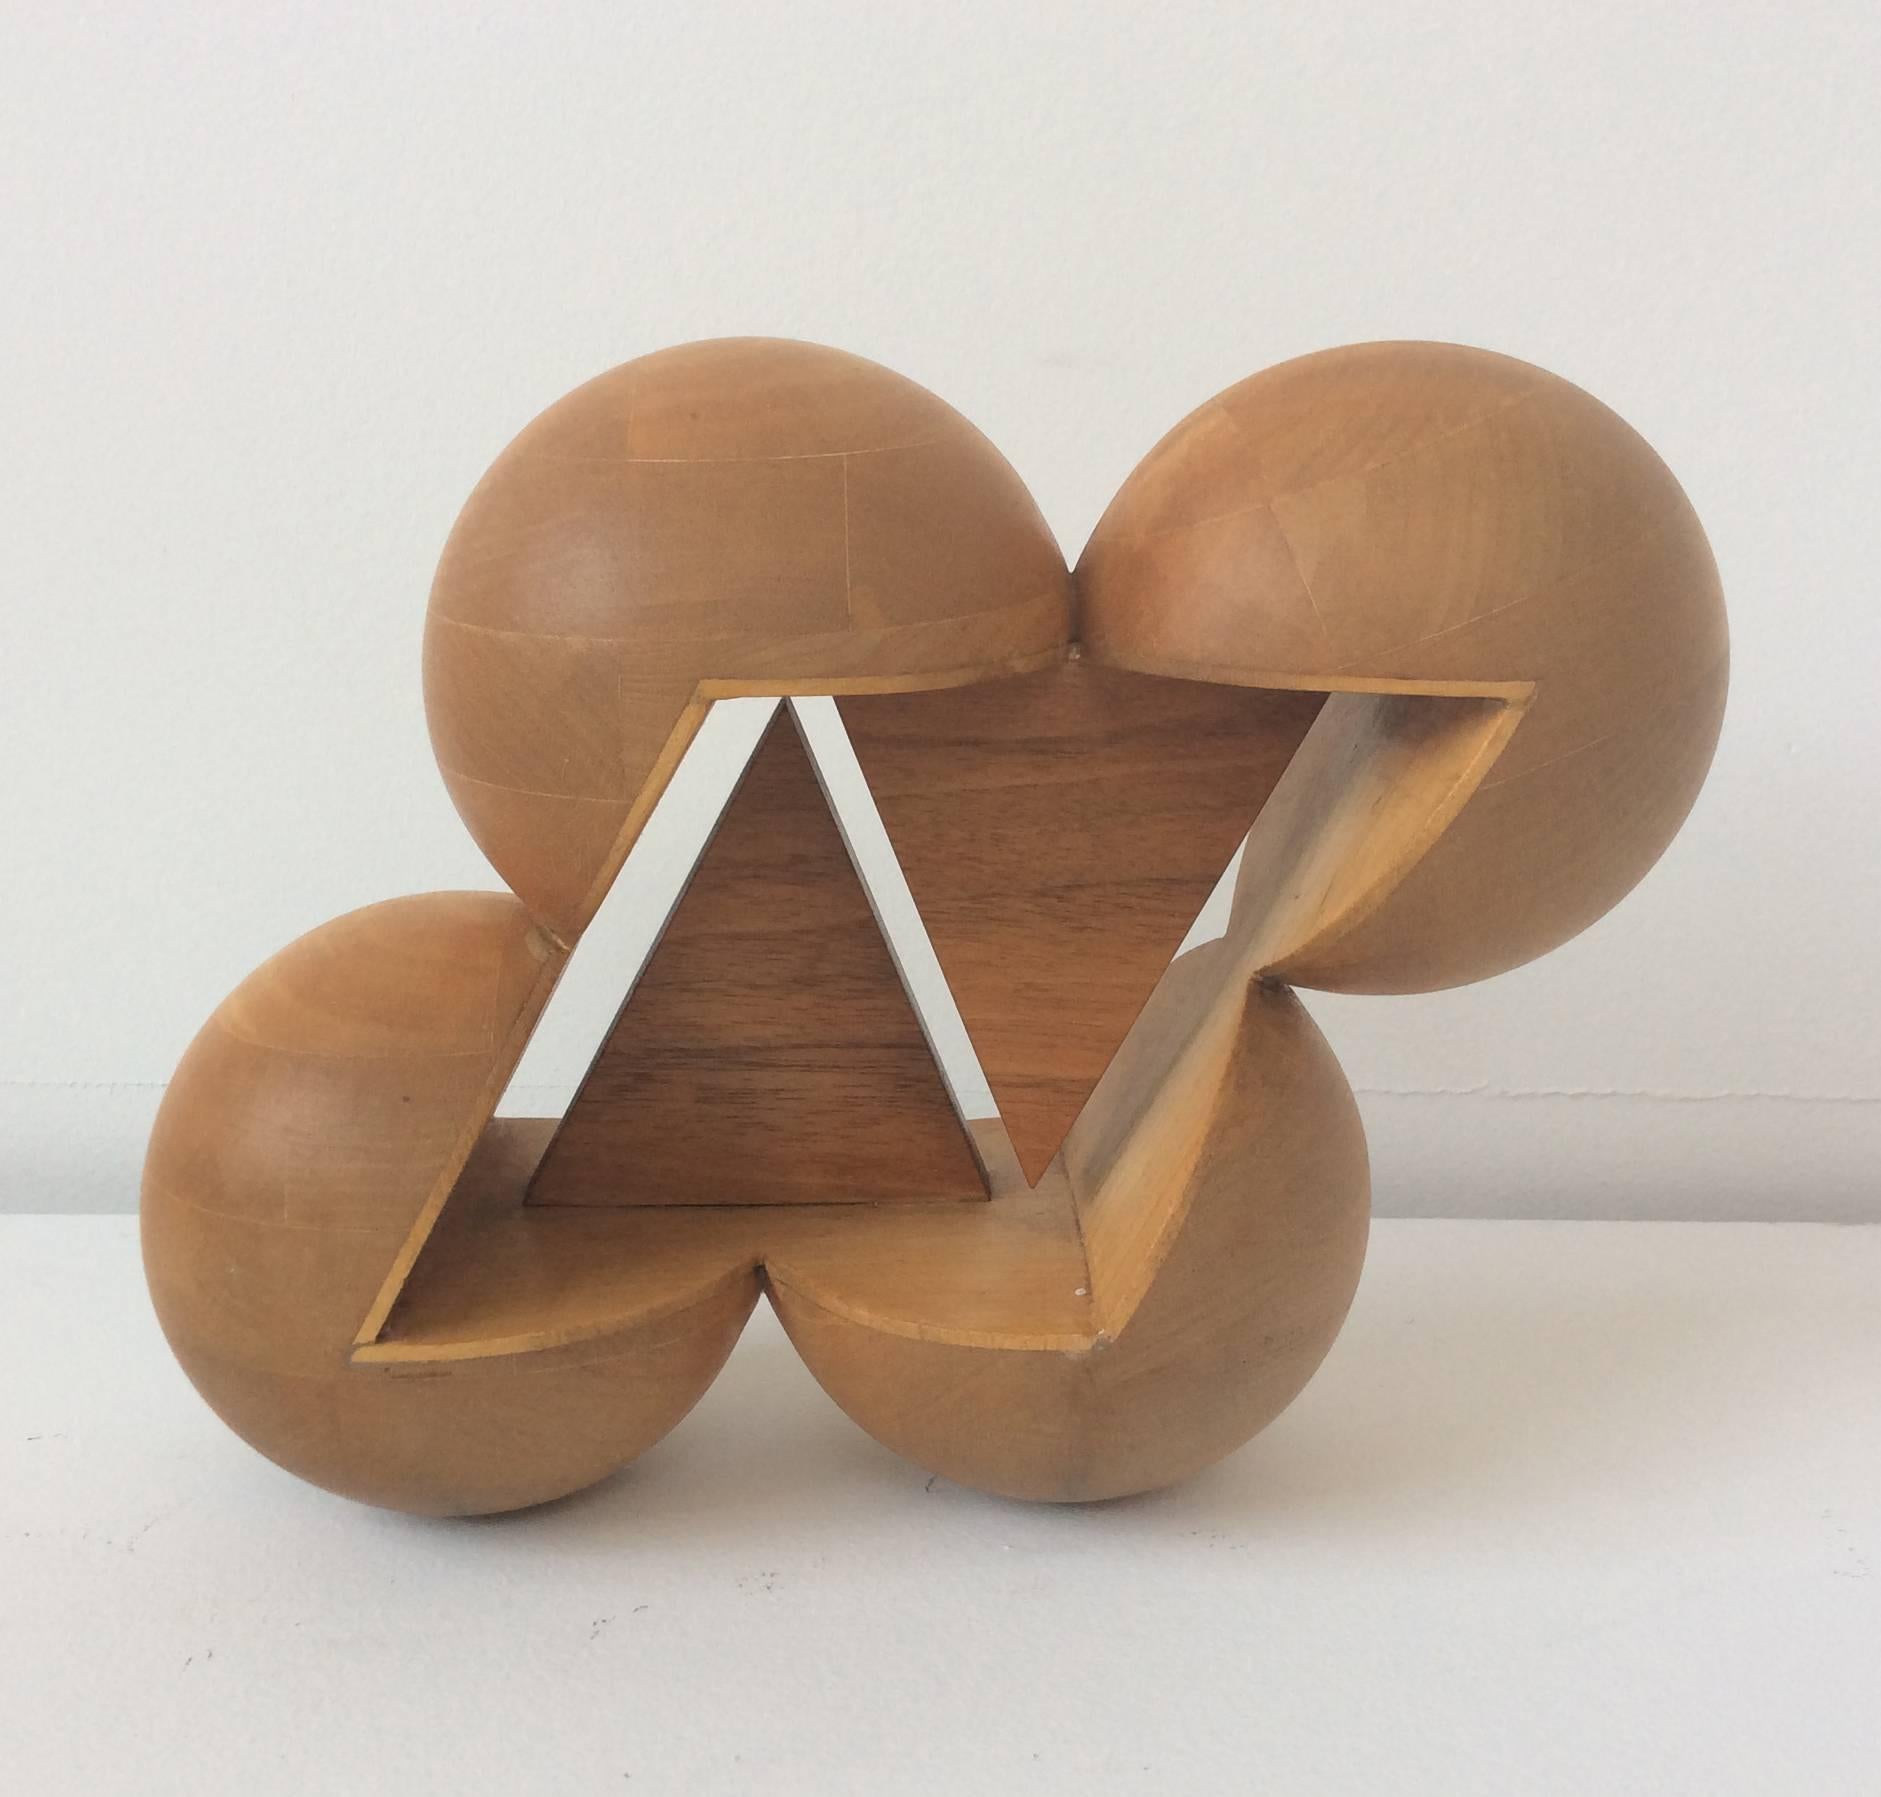 Abstract, mid century modern style small wooden table sculpture 
8 x 6 x 4 inches, wood

Inspired by the sleek mid century modern designs and use of organic materials, this small scale wooden sculpture is constructed of several round balls that